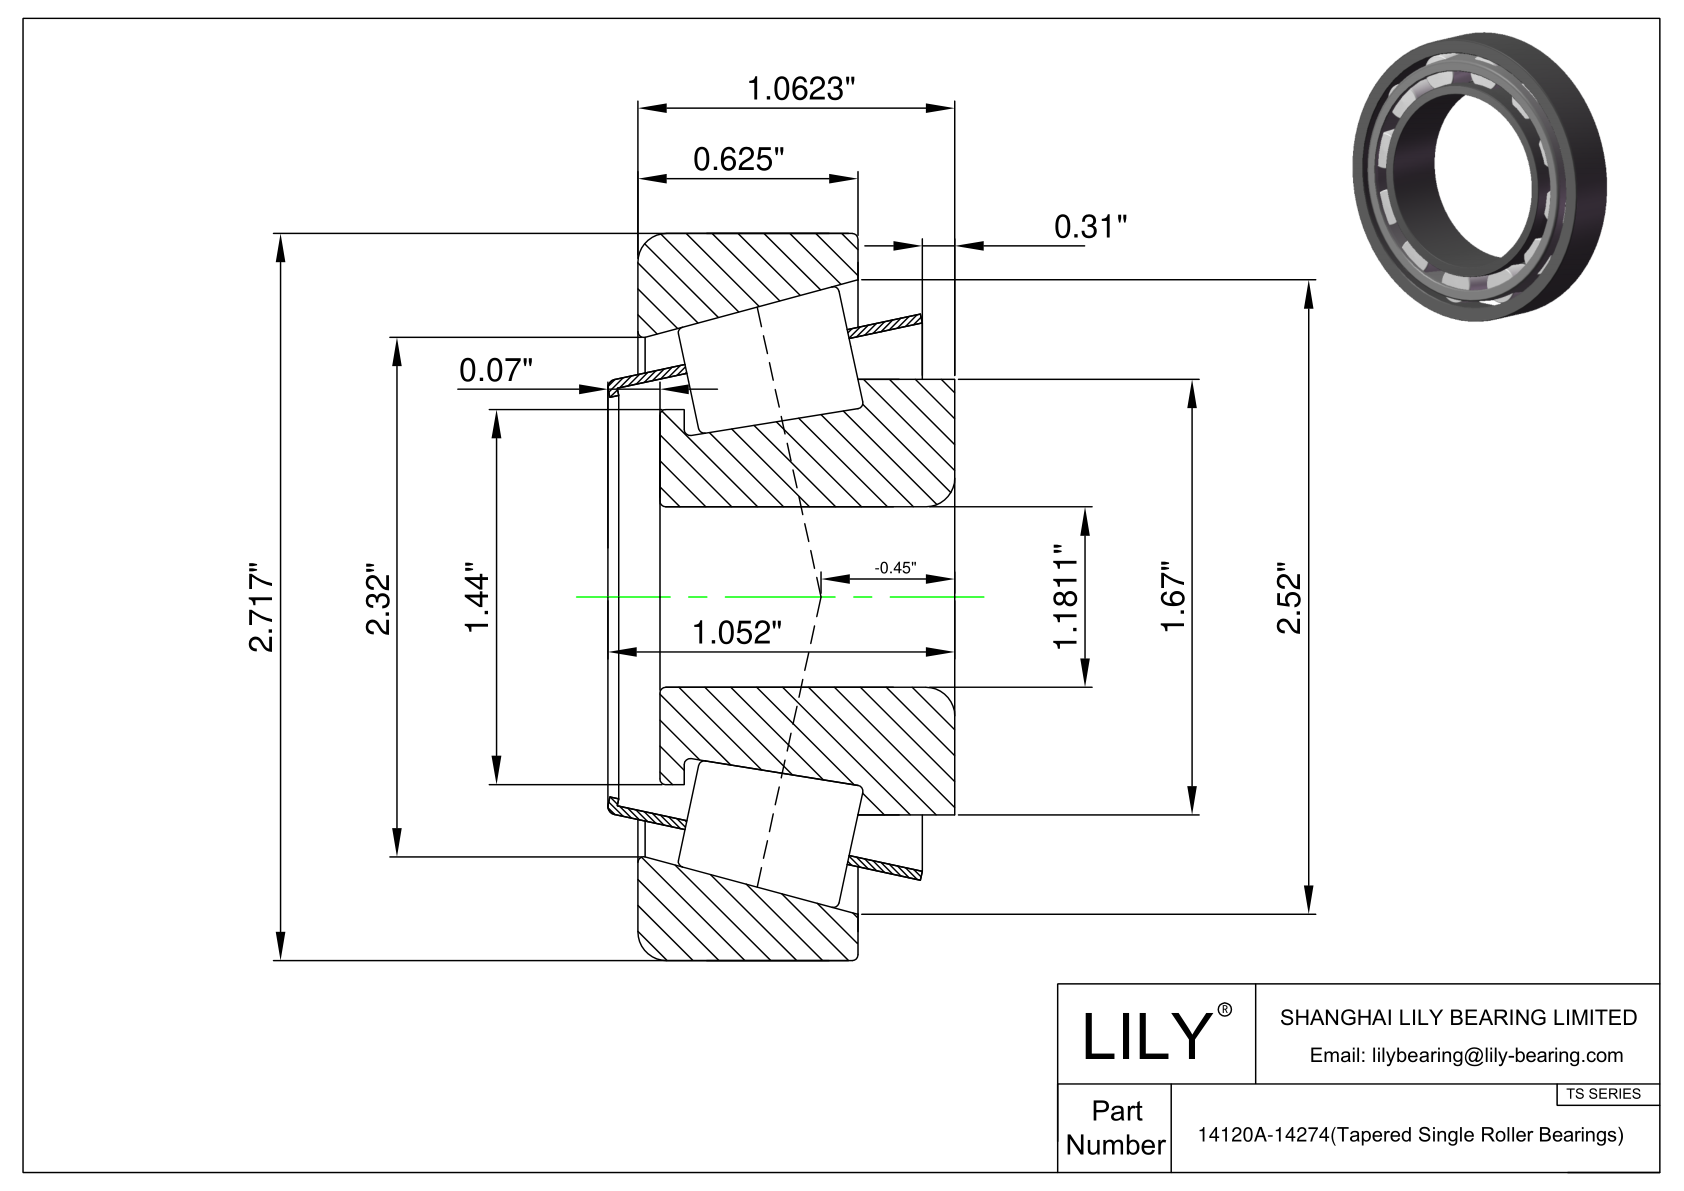 14120A-14274 TS (Tapered Single Roller Bearings) (Imperial) cad drawing